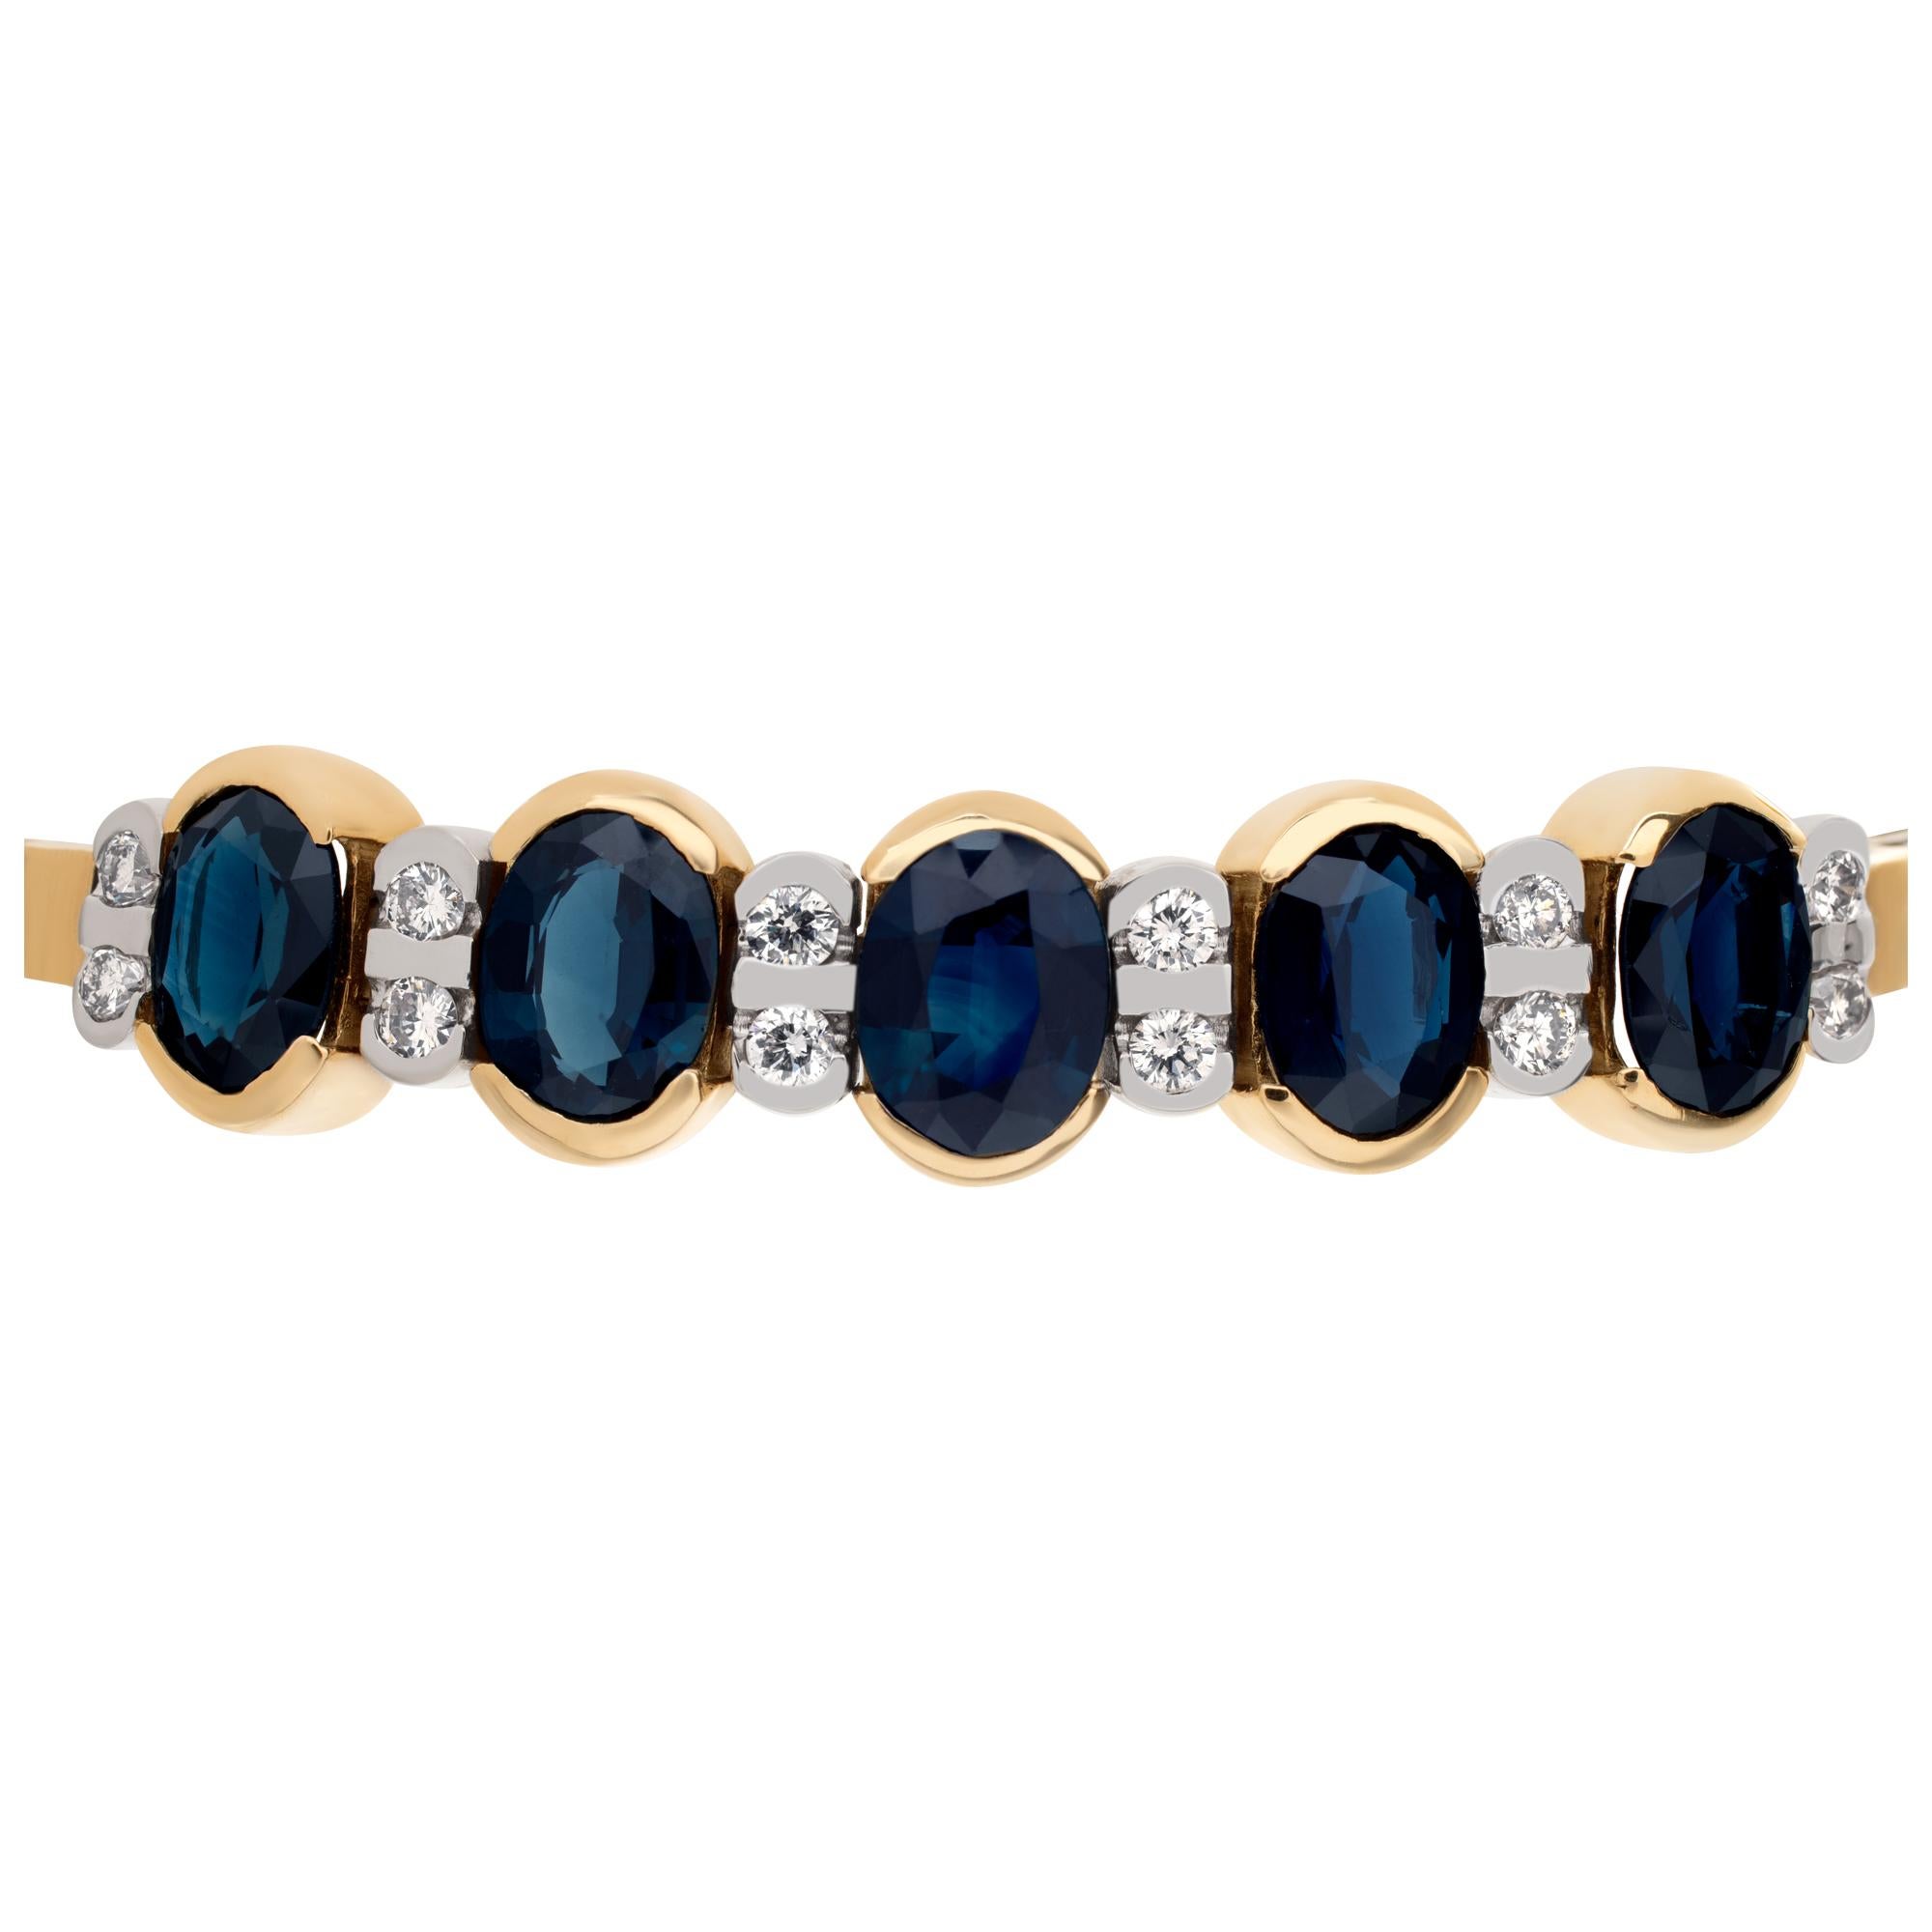 Sapphire and diamond bracelet in 14k white and yellow gold, with over 7 cararats in sapphires and over 0.50 carats in G-H color, VS-SI clarity diamonds . Length 7.5 inches
